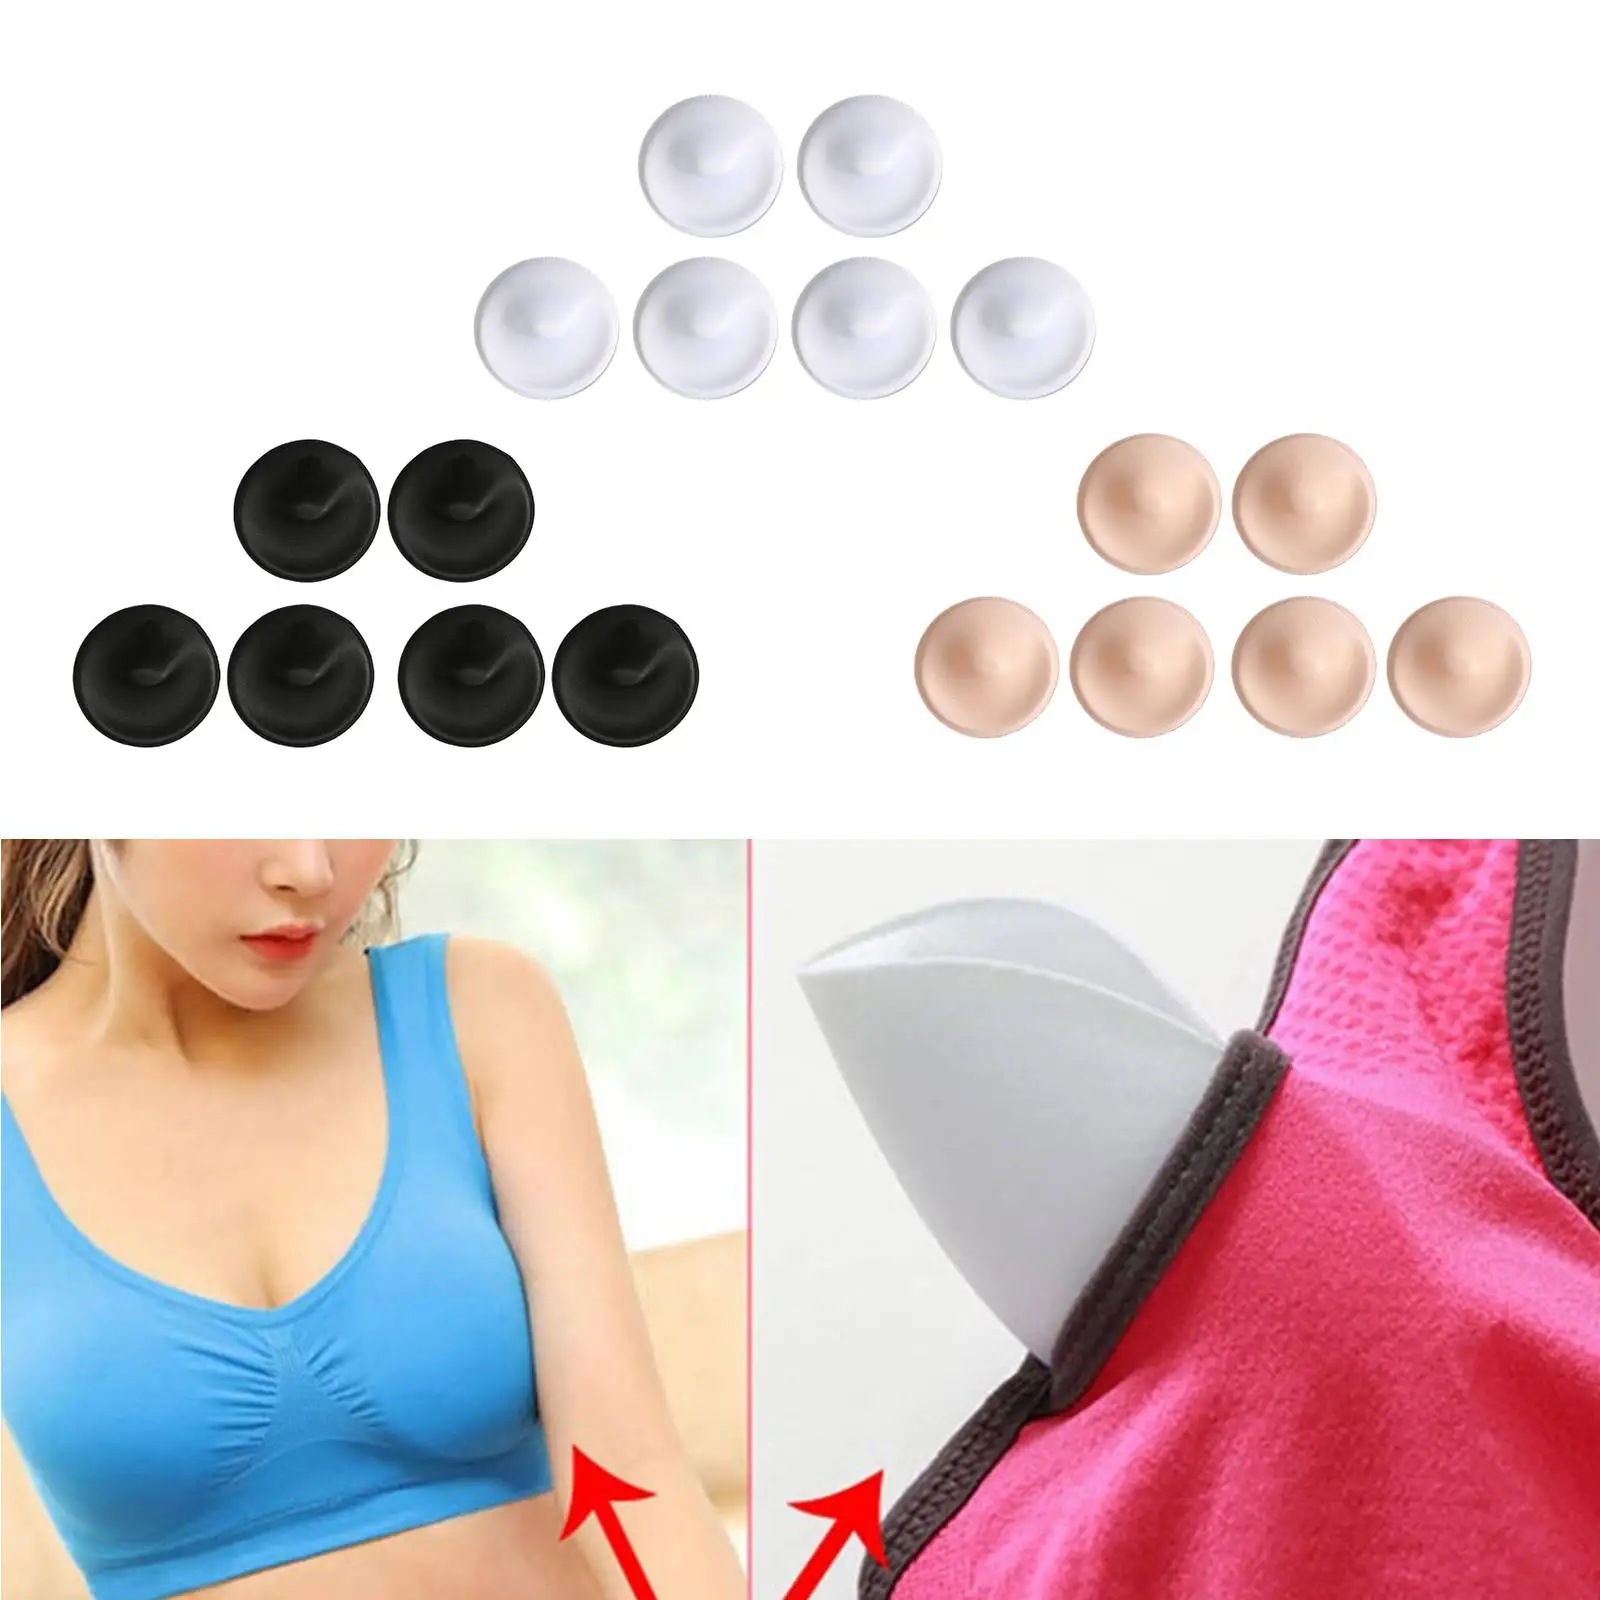 

3 Pairs Bra Pads Inserts Push up Comfy Removable Soft Round Bra Cups Breast Enhancers Inserts for Bikini Top Swimsuit Sports Bra